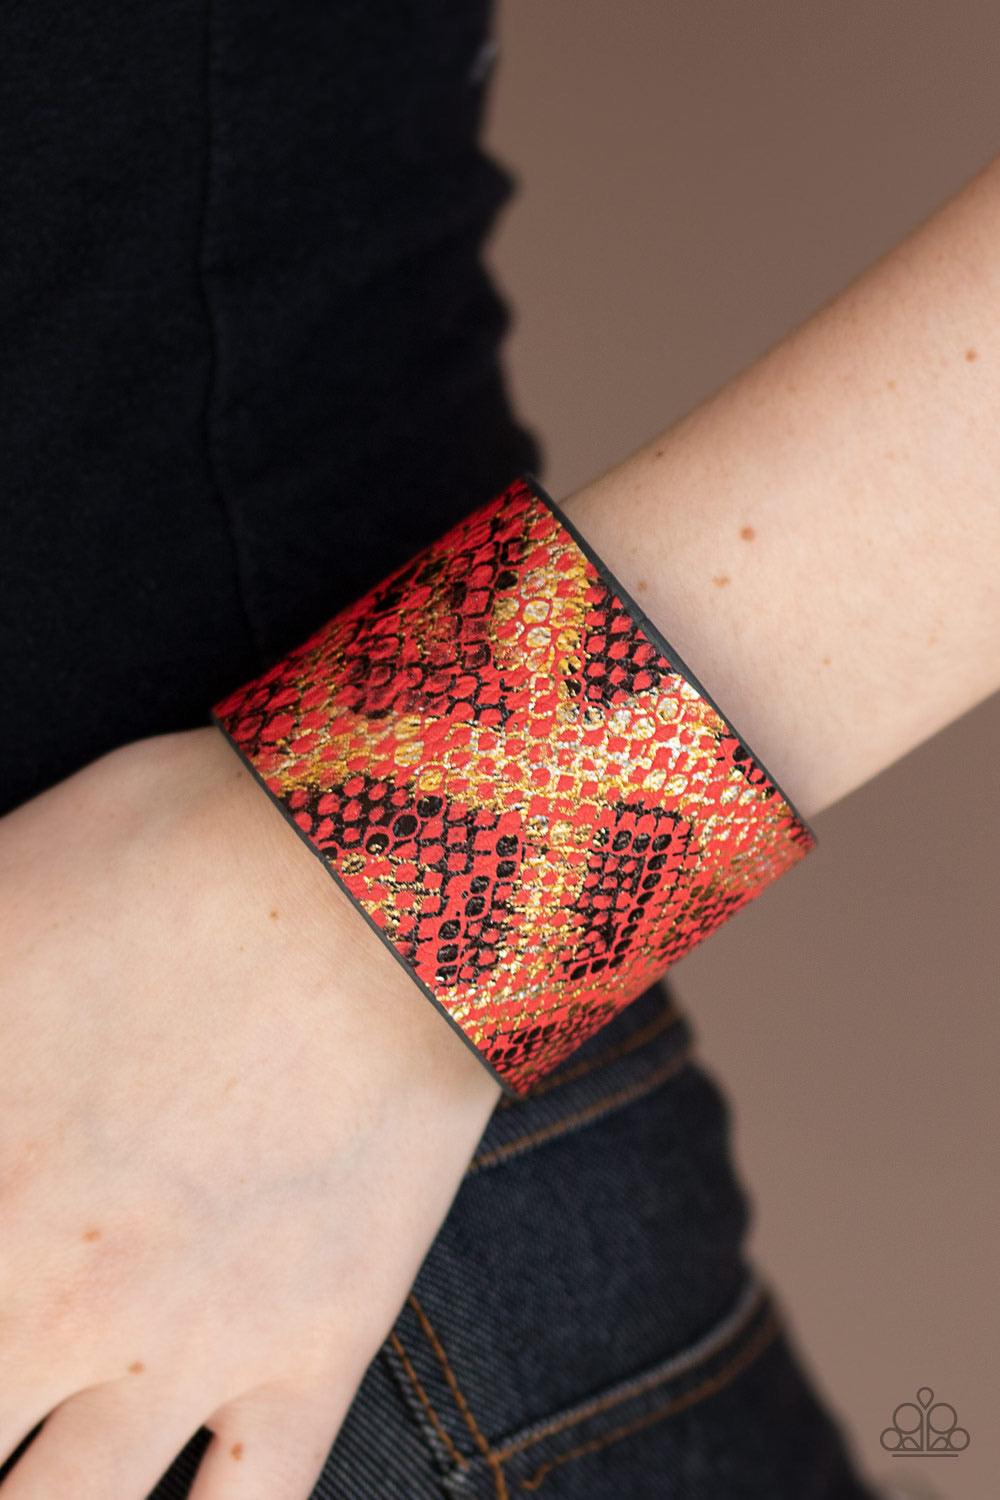 Paparazzi Accessories Serpent Shimmer - Red Featuring a shiny gold and black python print, a thick red leather band wraps around the wrist for a wild shimmer. Features an adjustable snap clos Jewelry